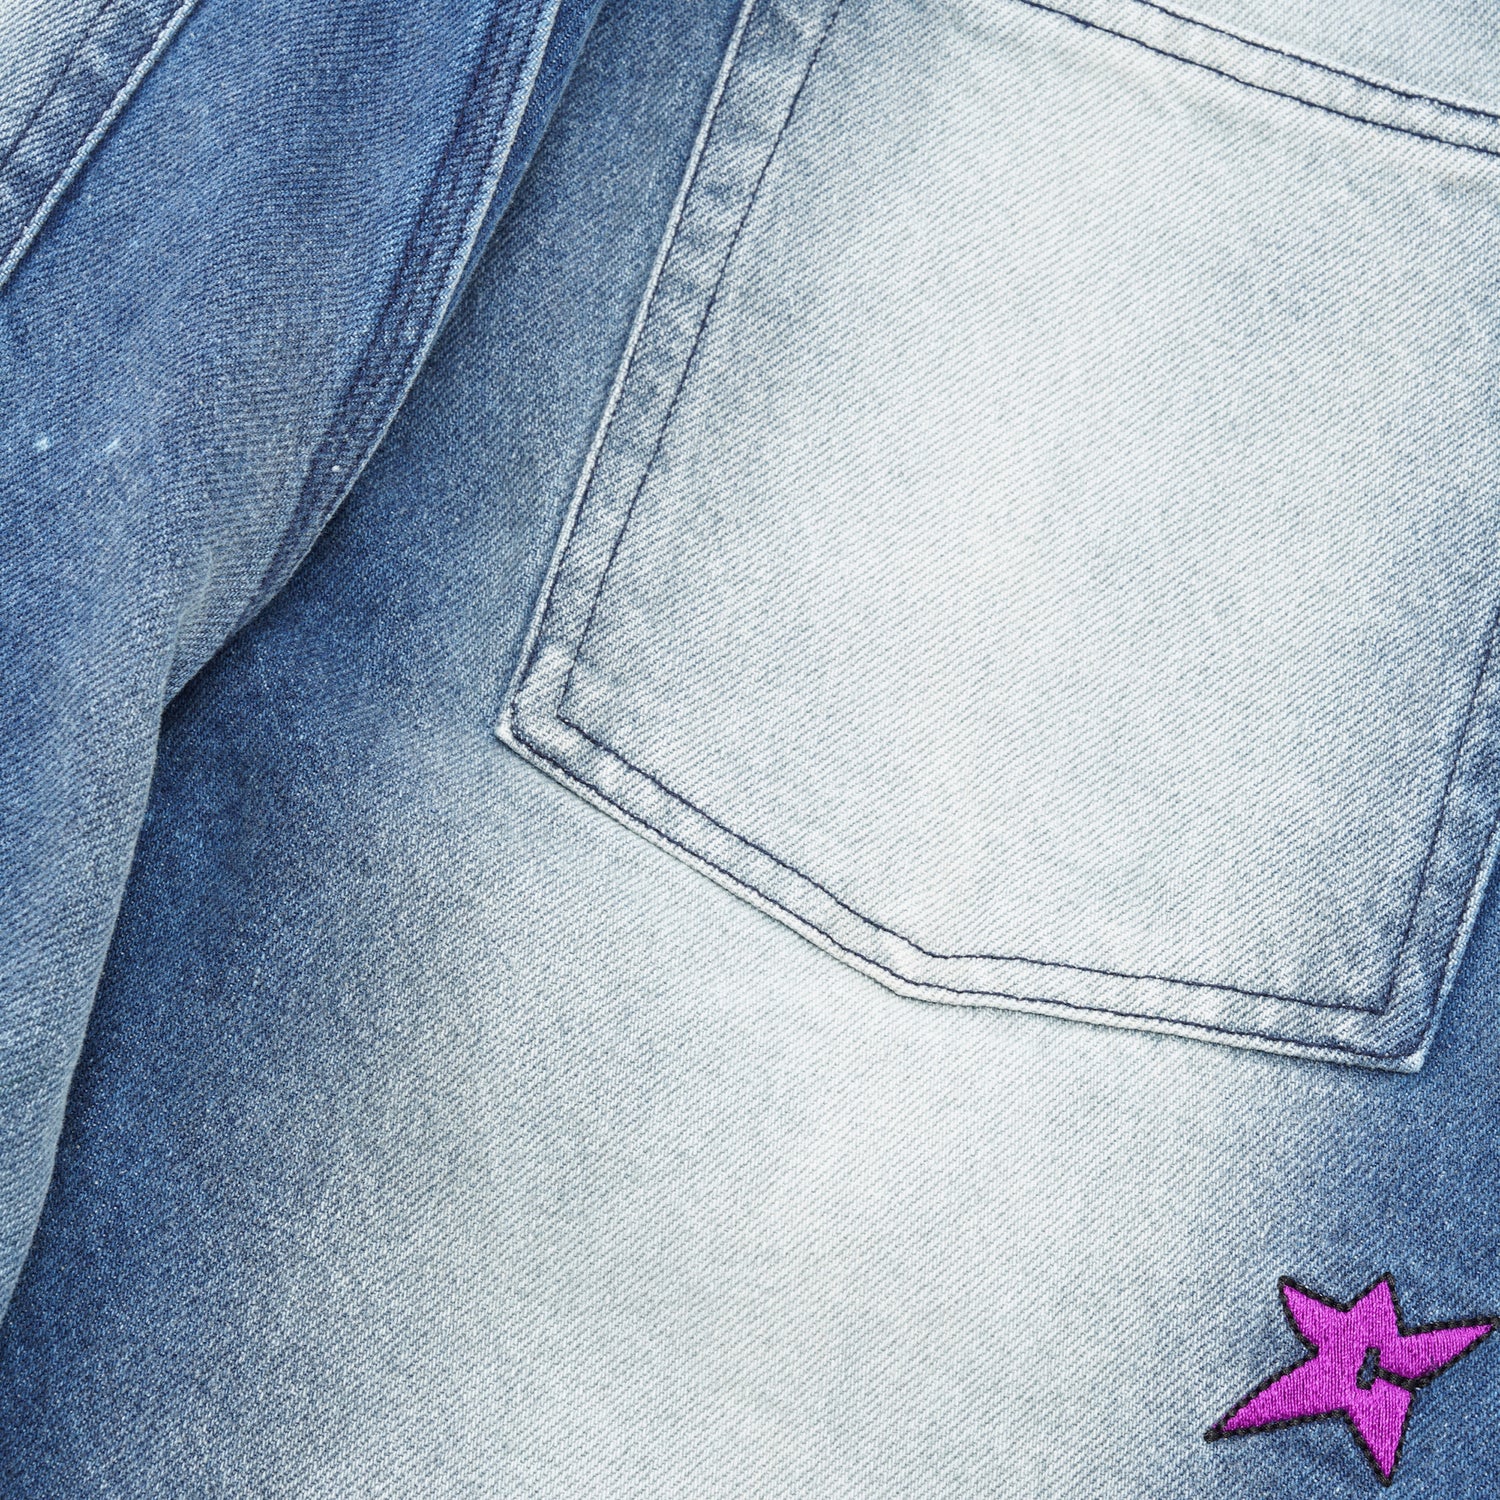 C-Star Jeans, Bleached Blue